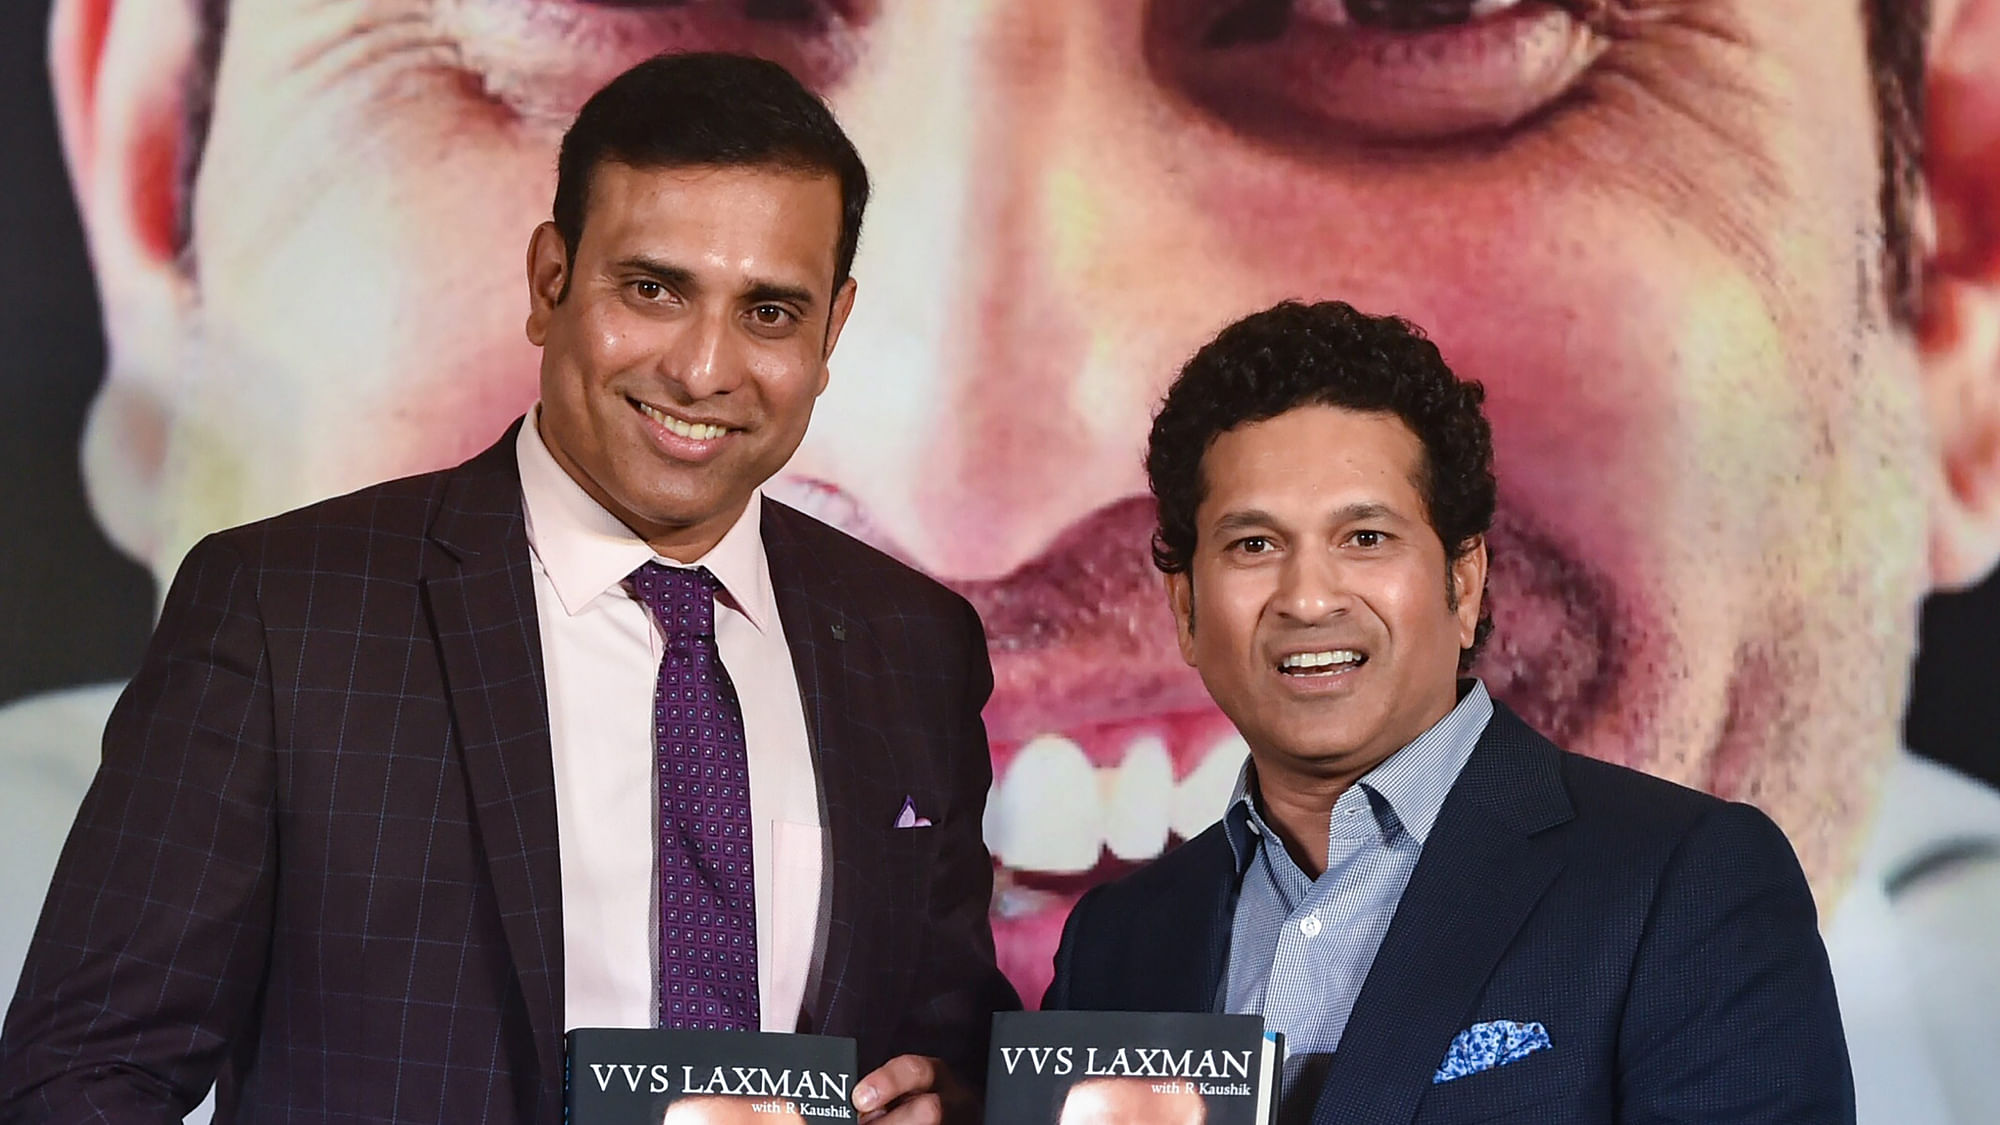 VVS Laxman and Sachin Tendulkar have been sent notices by the BCCI’s Ombudsman.